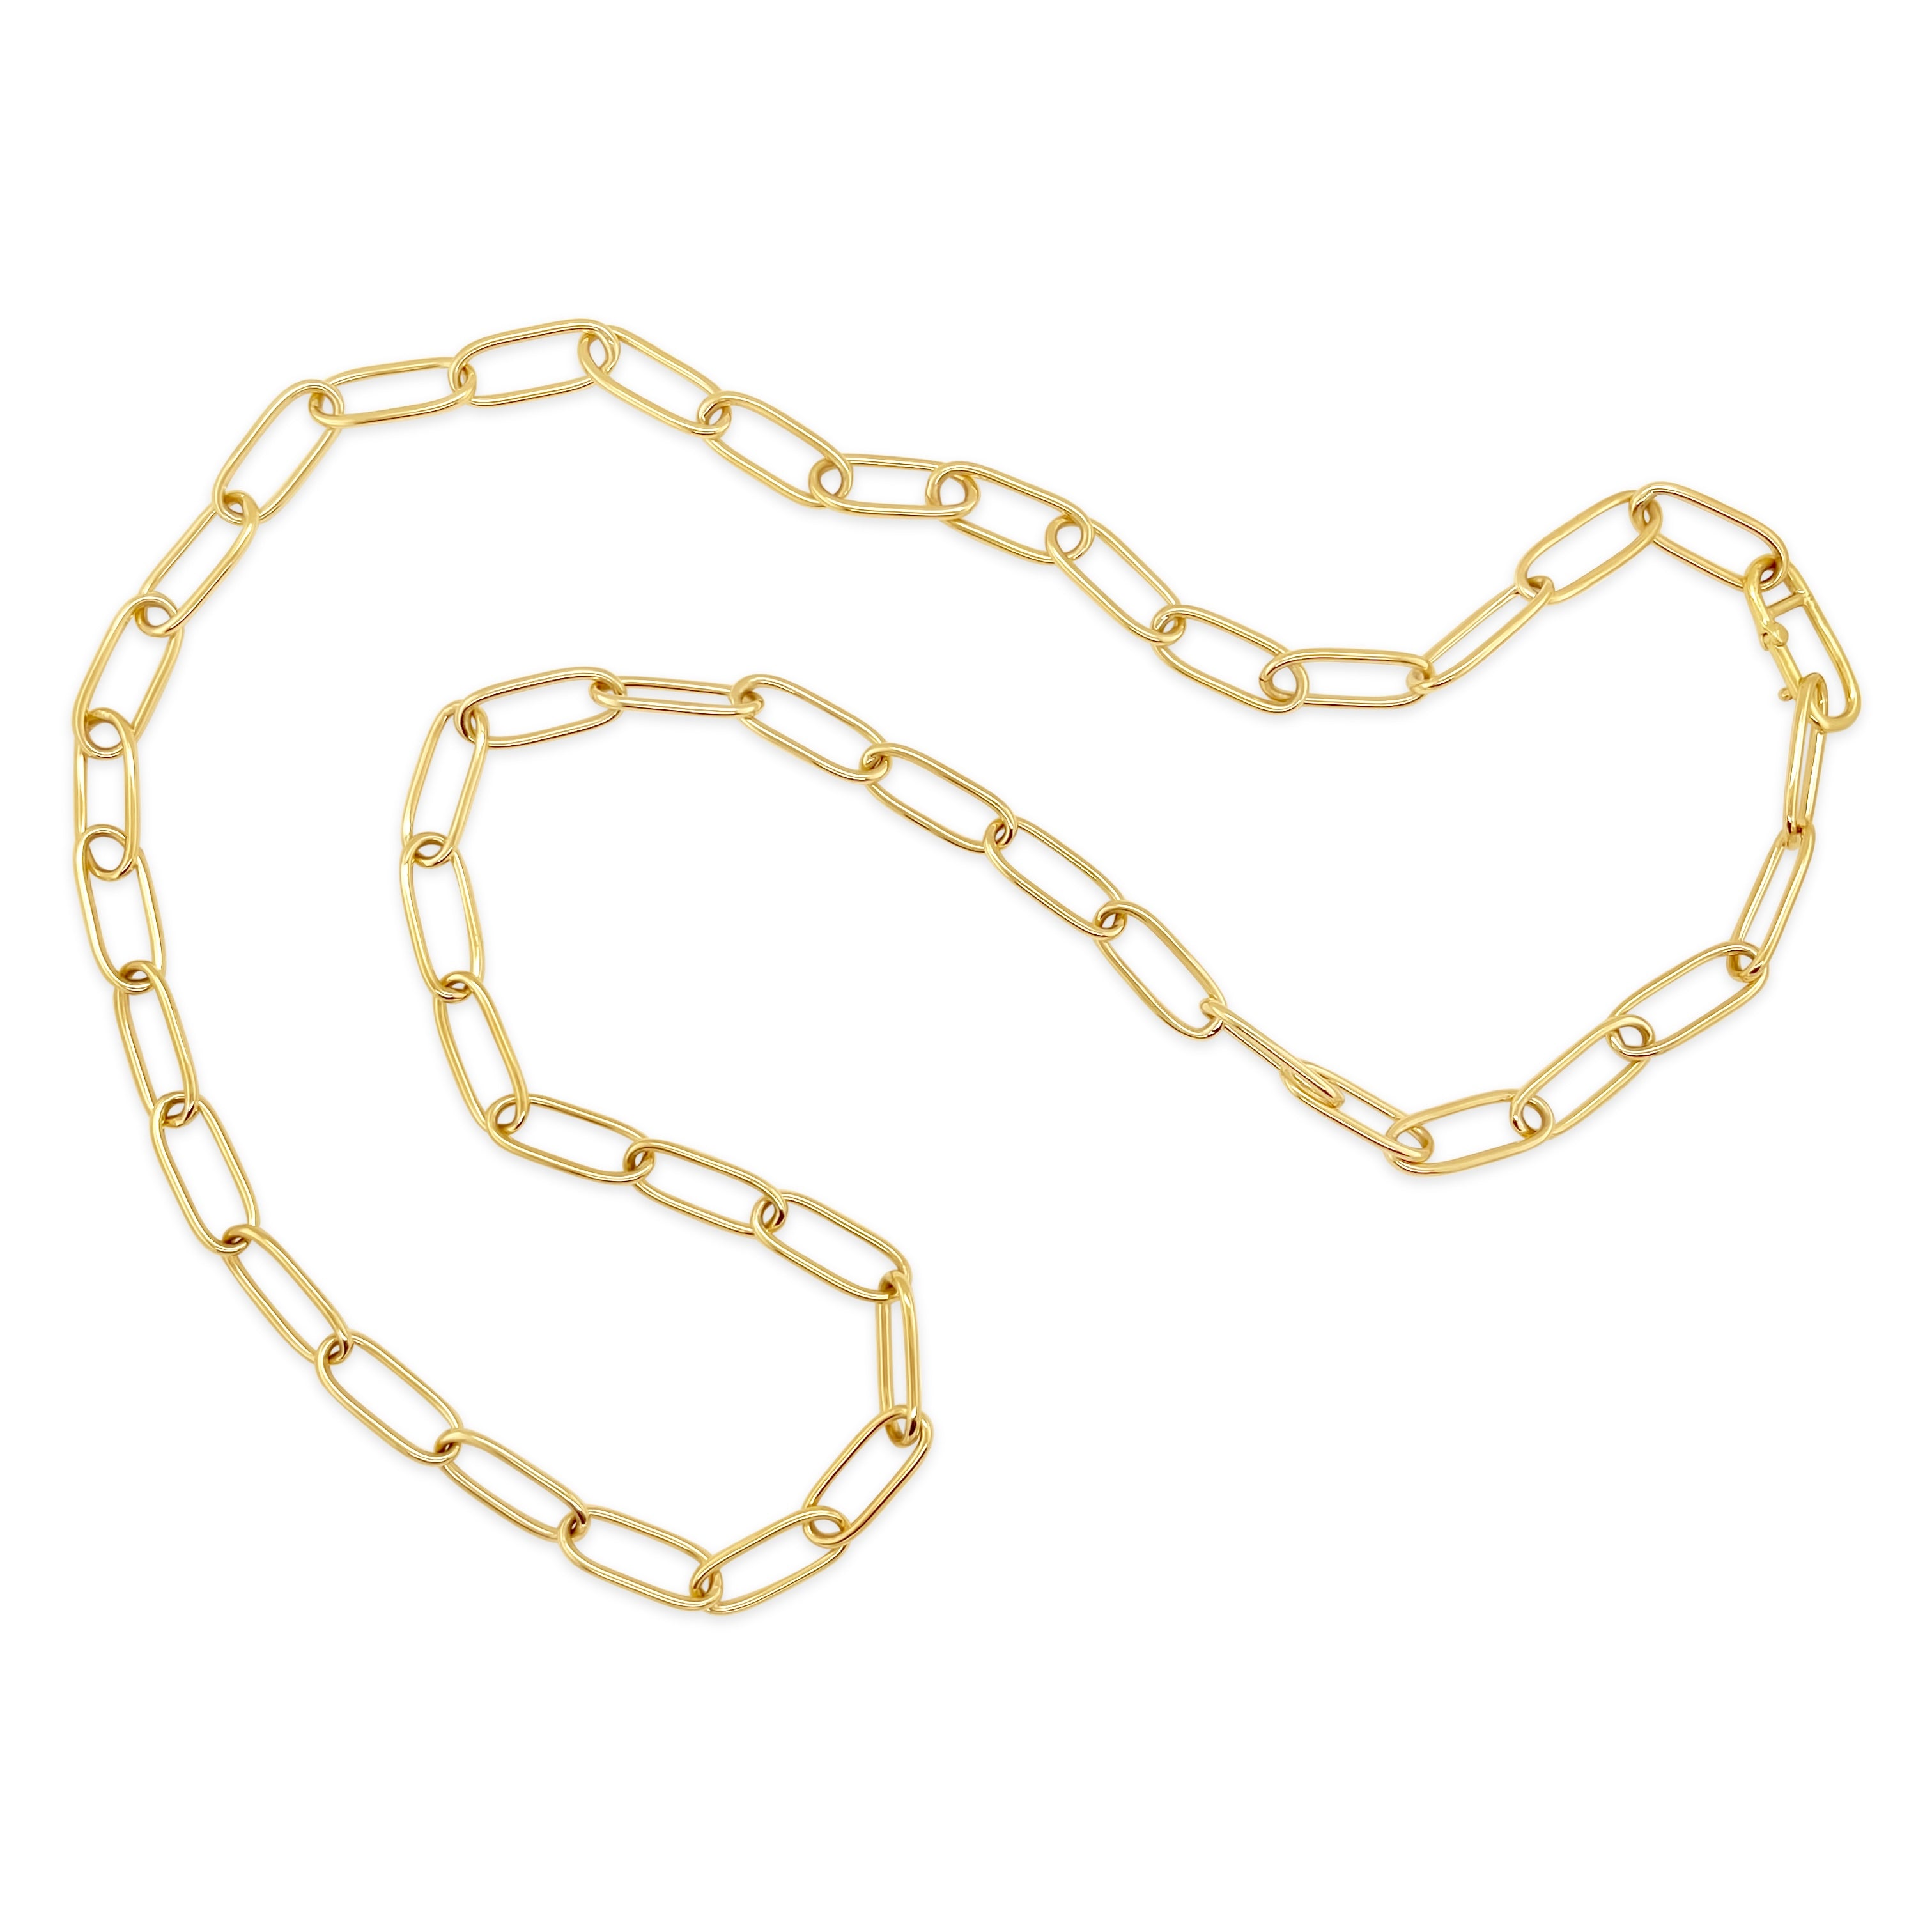 Gold Filled Linked Chain Necklace with Rectangular Pendant – H&R Fashion  Jewelry